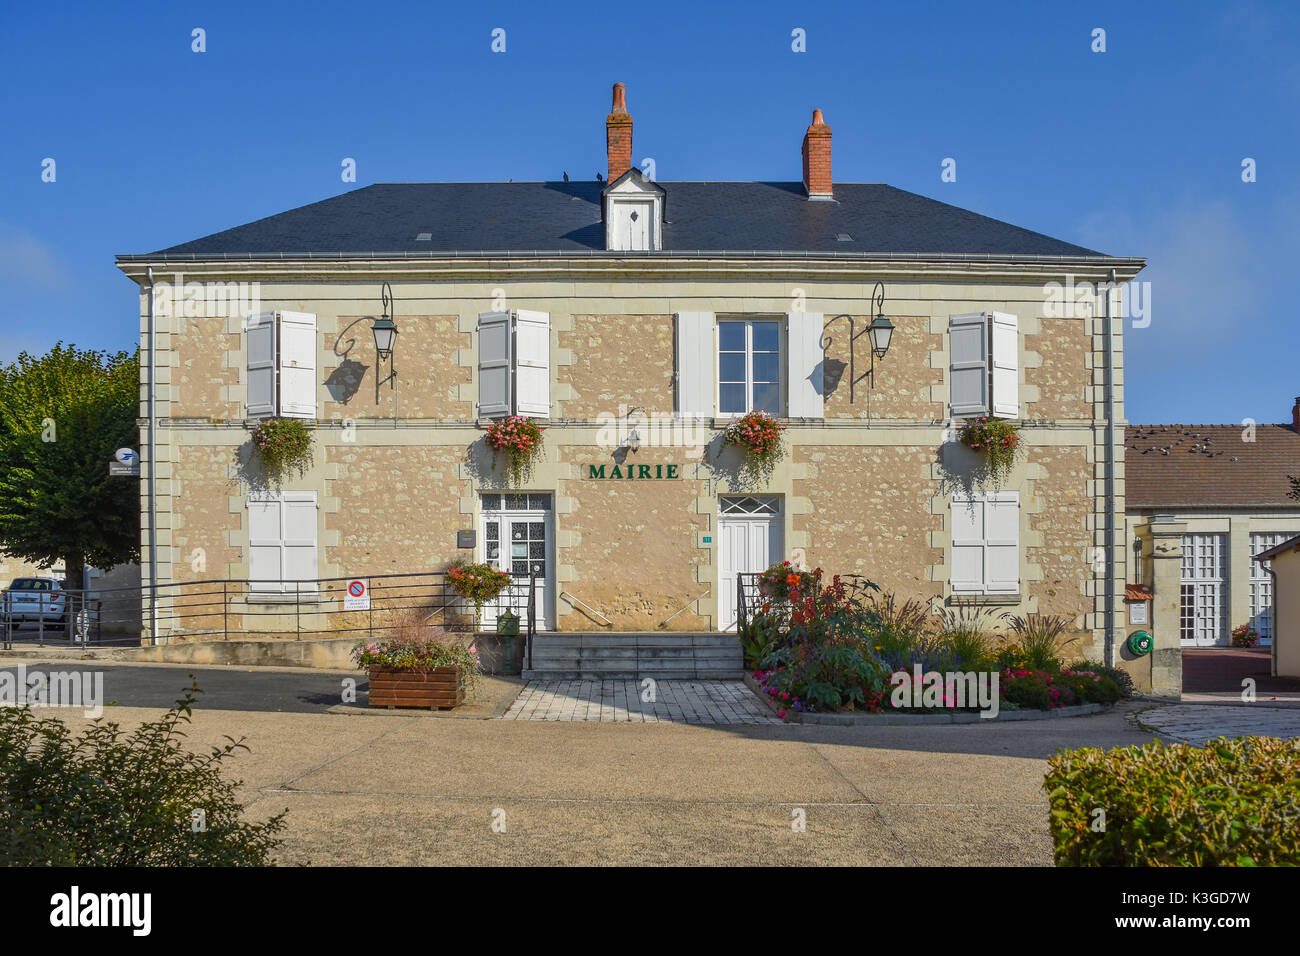 Mairie (town hall), Bossay-suClaise, France Stock Photo